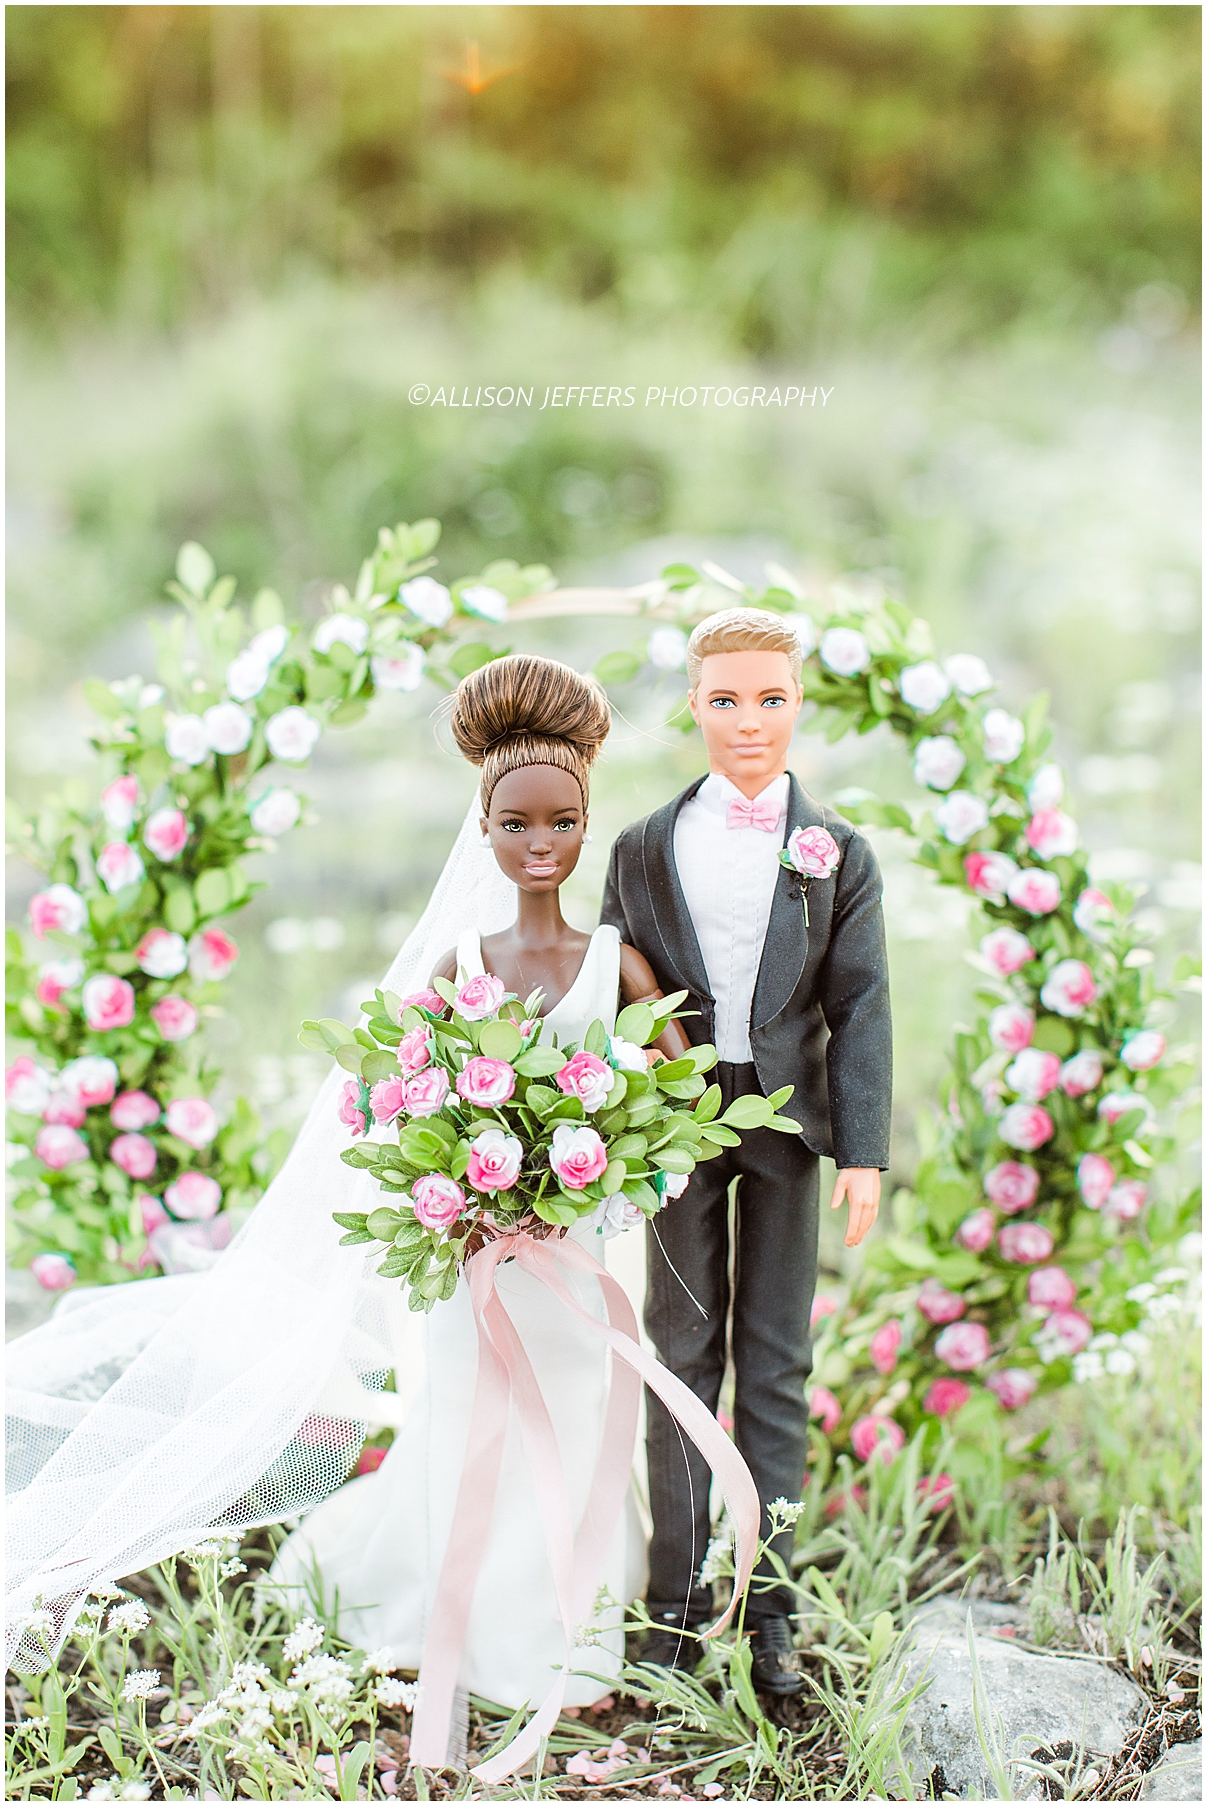 Barbie and Ken dream wedding photography styled shoot by Allison Jeffers Photography 0011